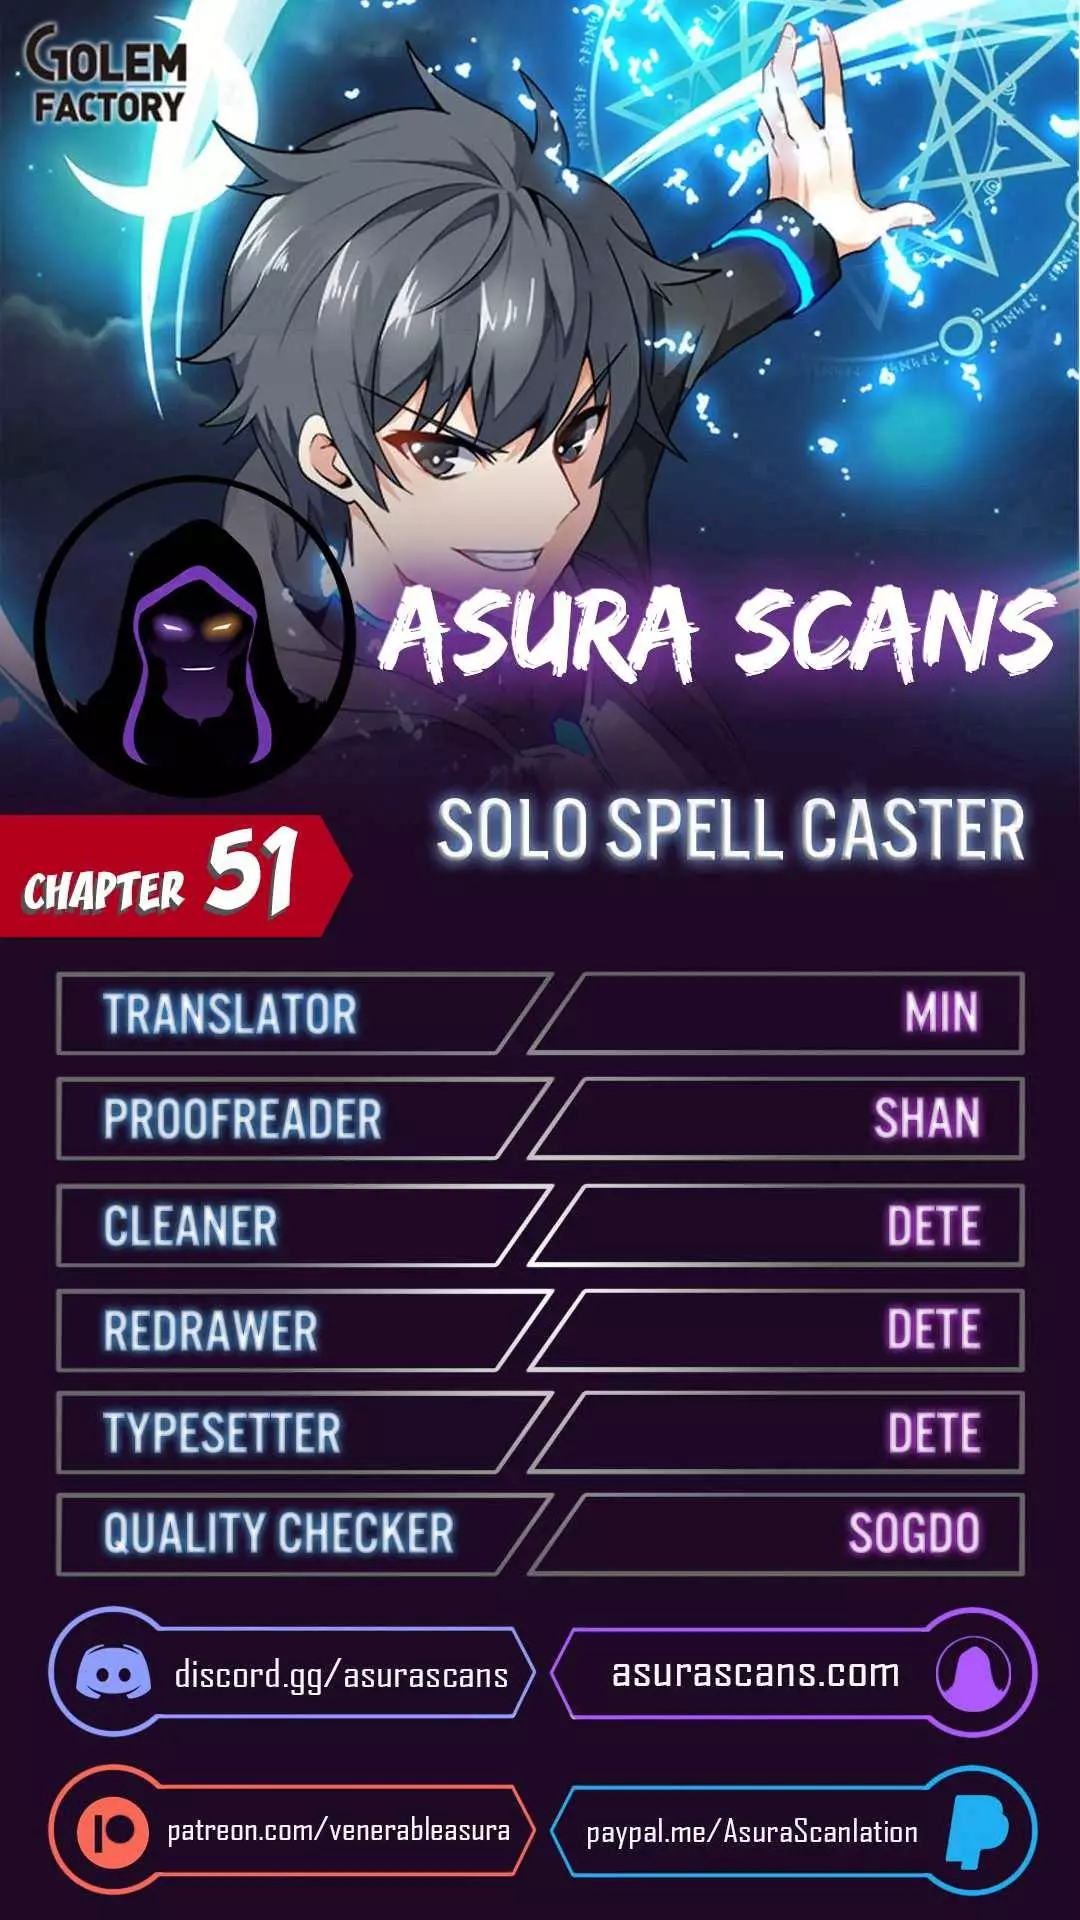 Solo Spell Caster - 51 page 1